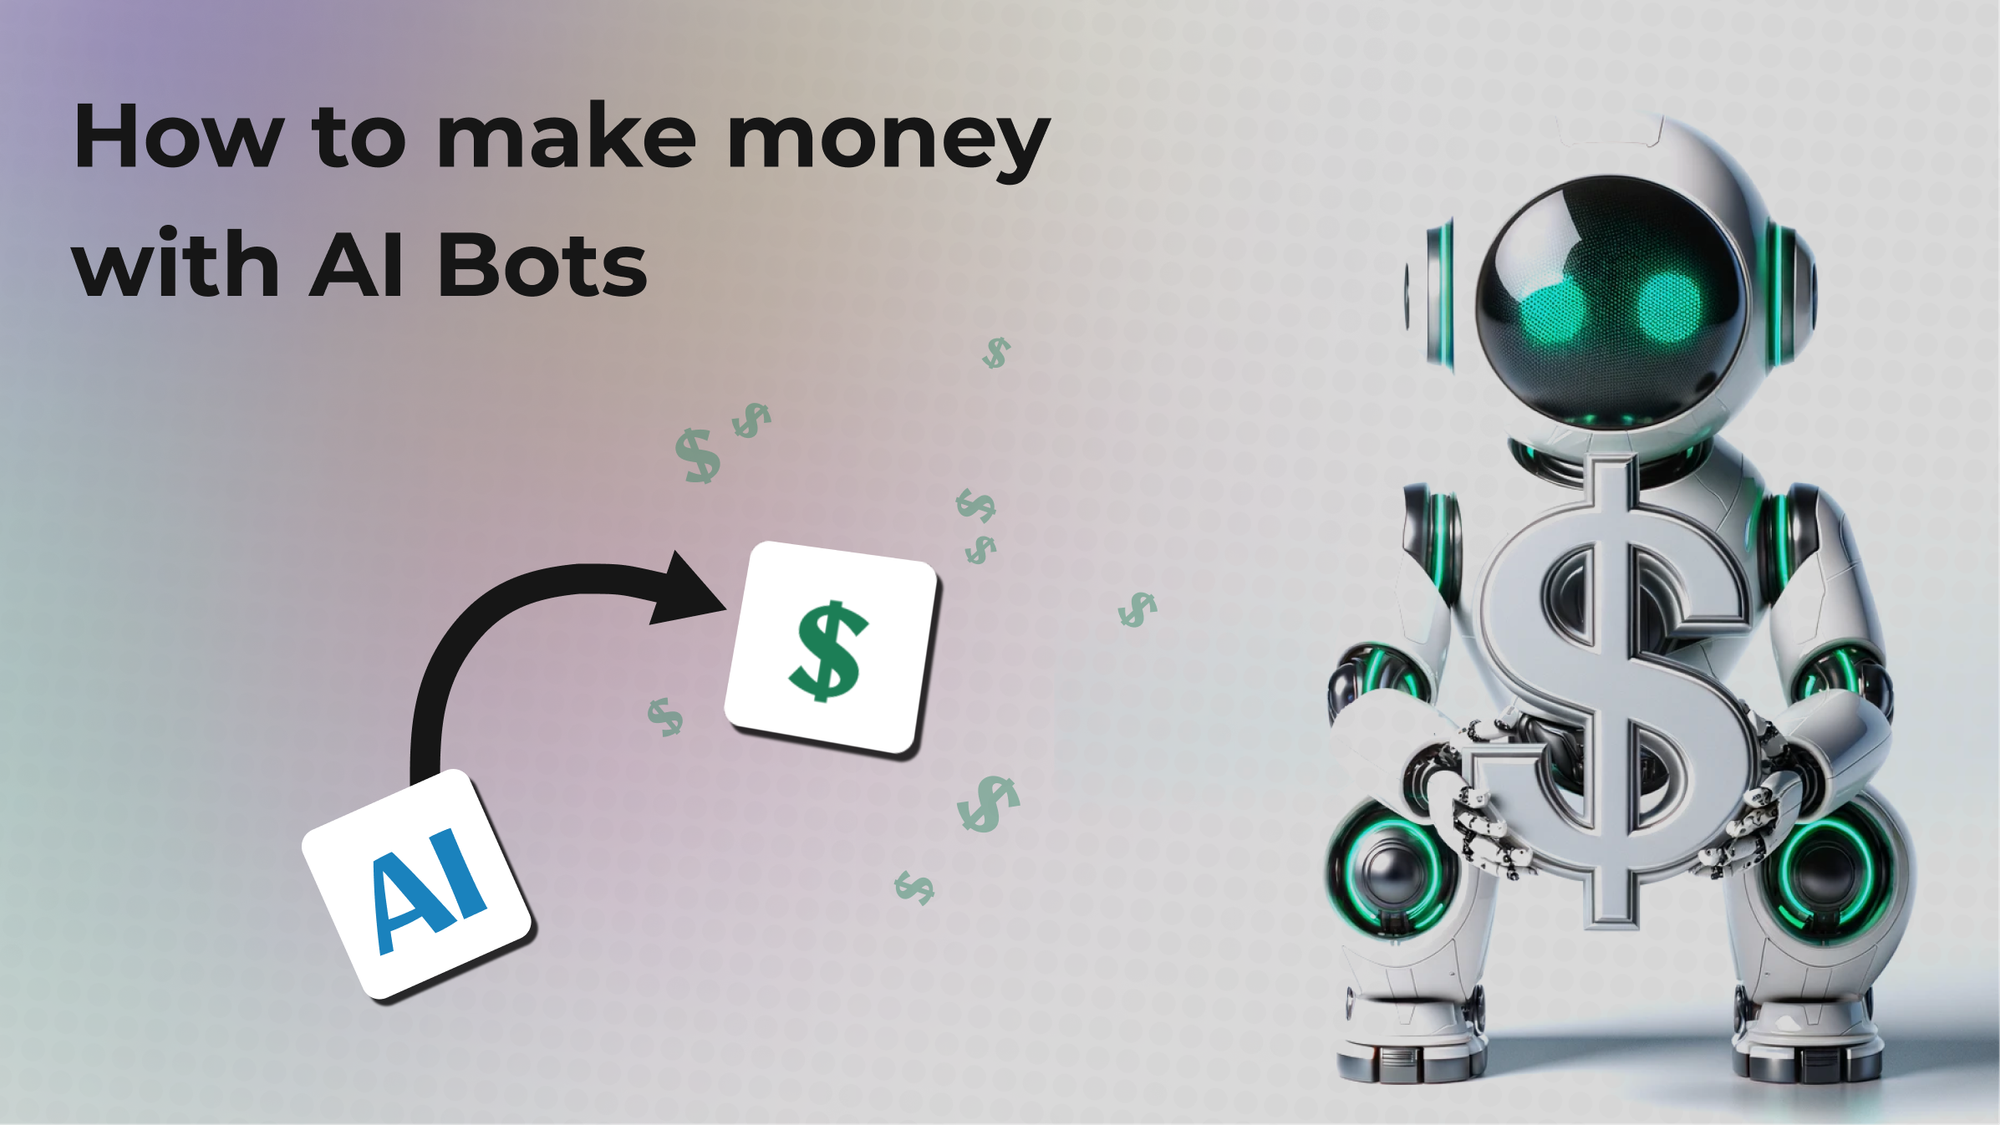 How To Make Money with AI Bots